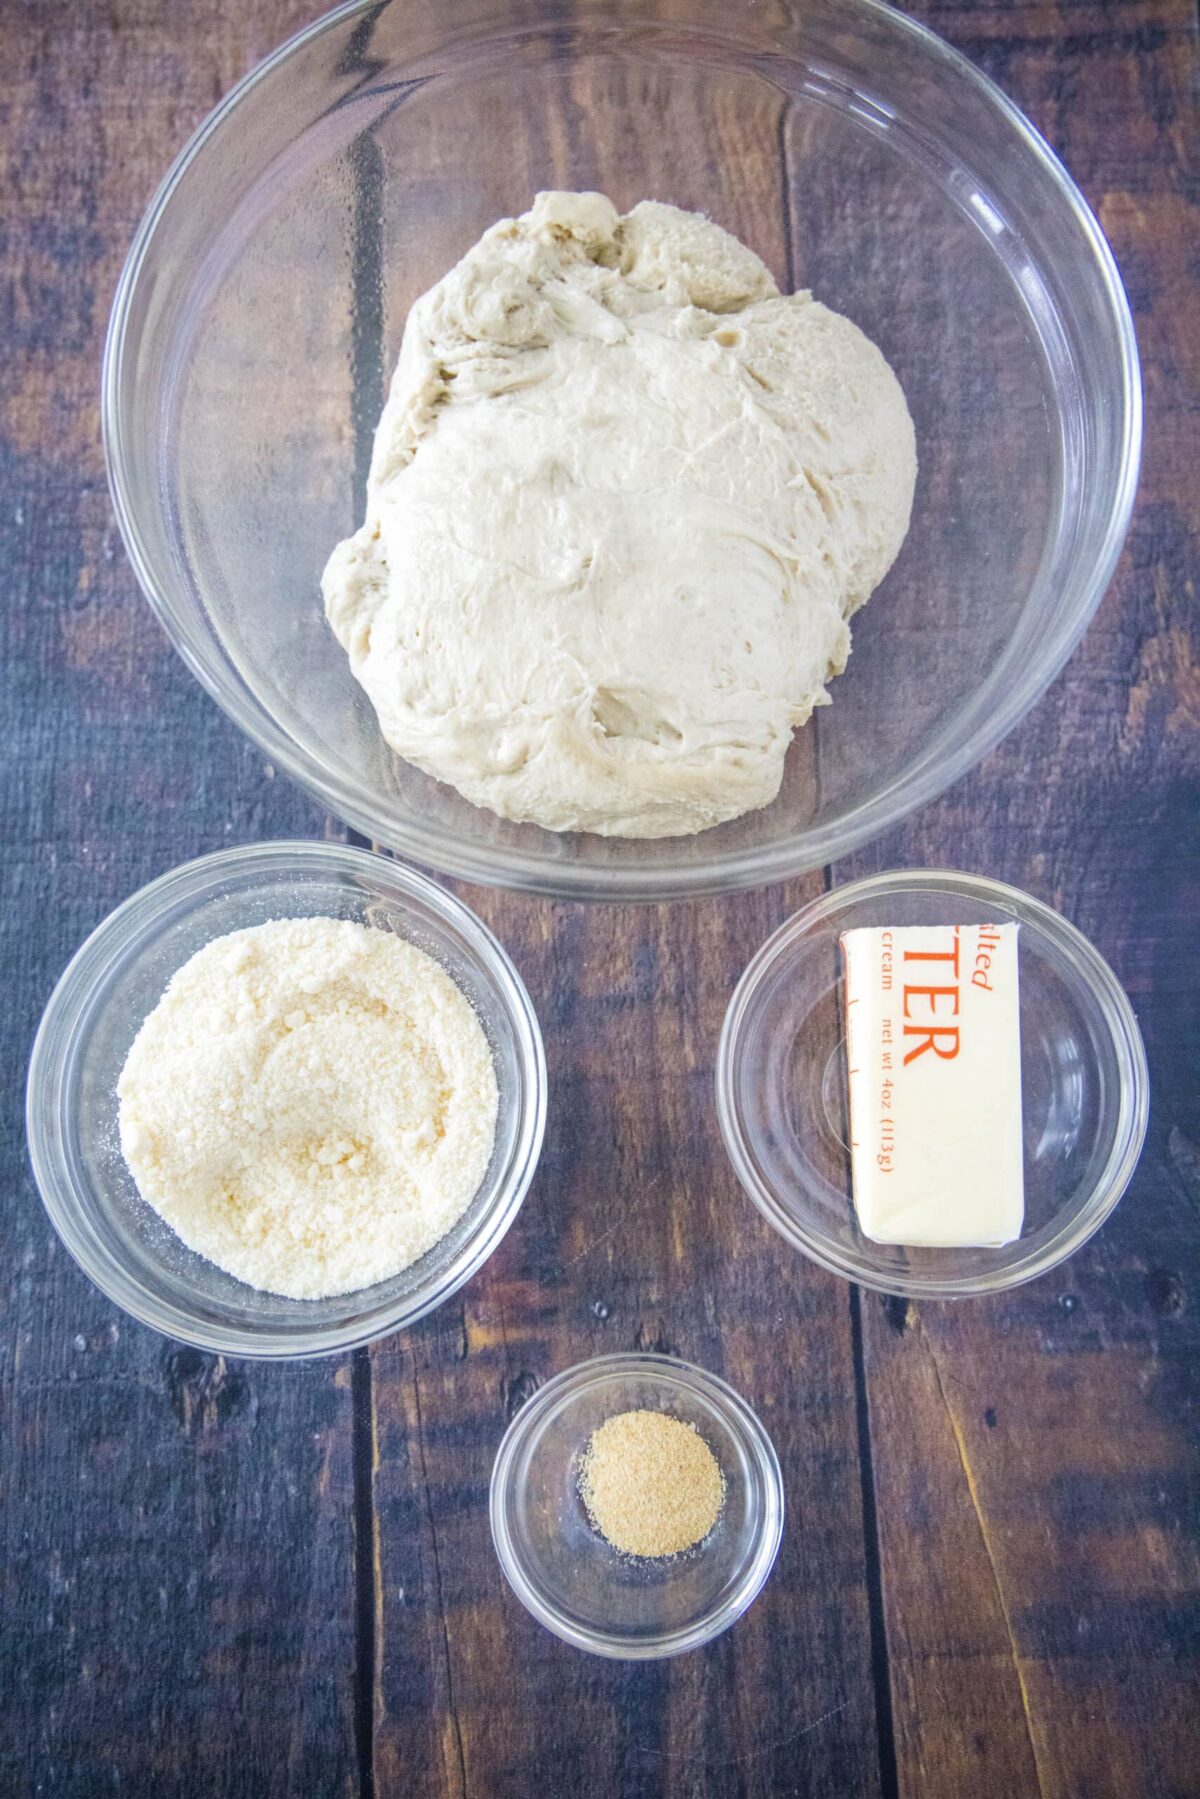 Overhead view of the ingredients needed for crazy bread: a bowl of pizza dough, a bowl of parmesan cheese, a bowl of garlic powder, and half a stick of butter